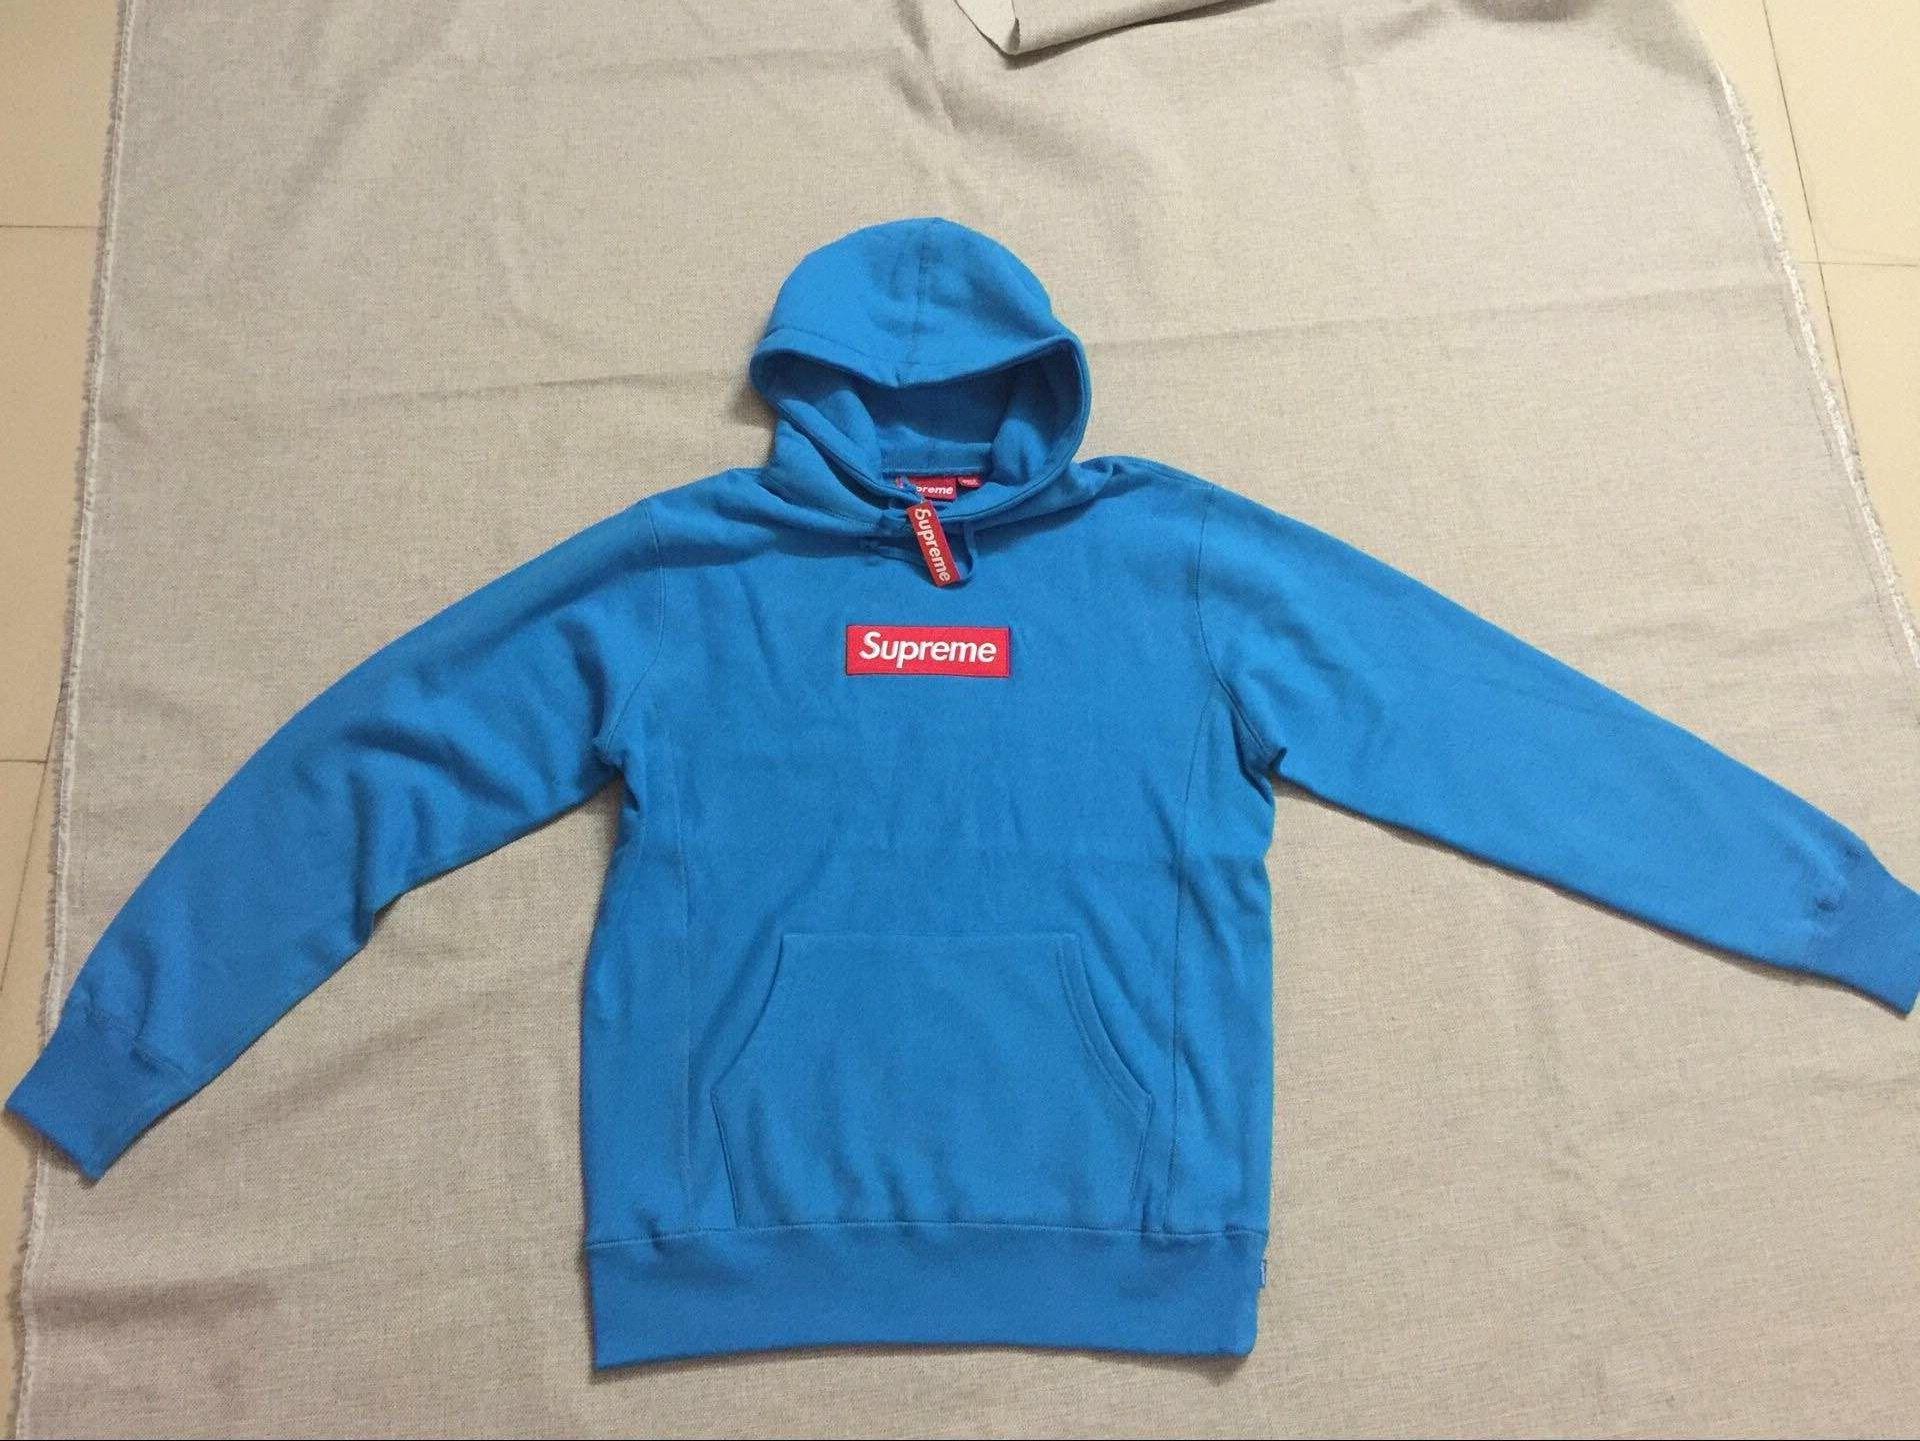 Teal Supreme Box Logo - QC UNHS teal box logo, im aware of the flaws, just looking